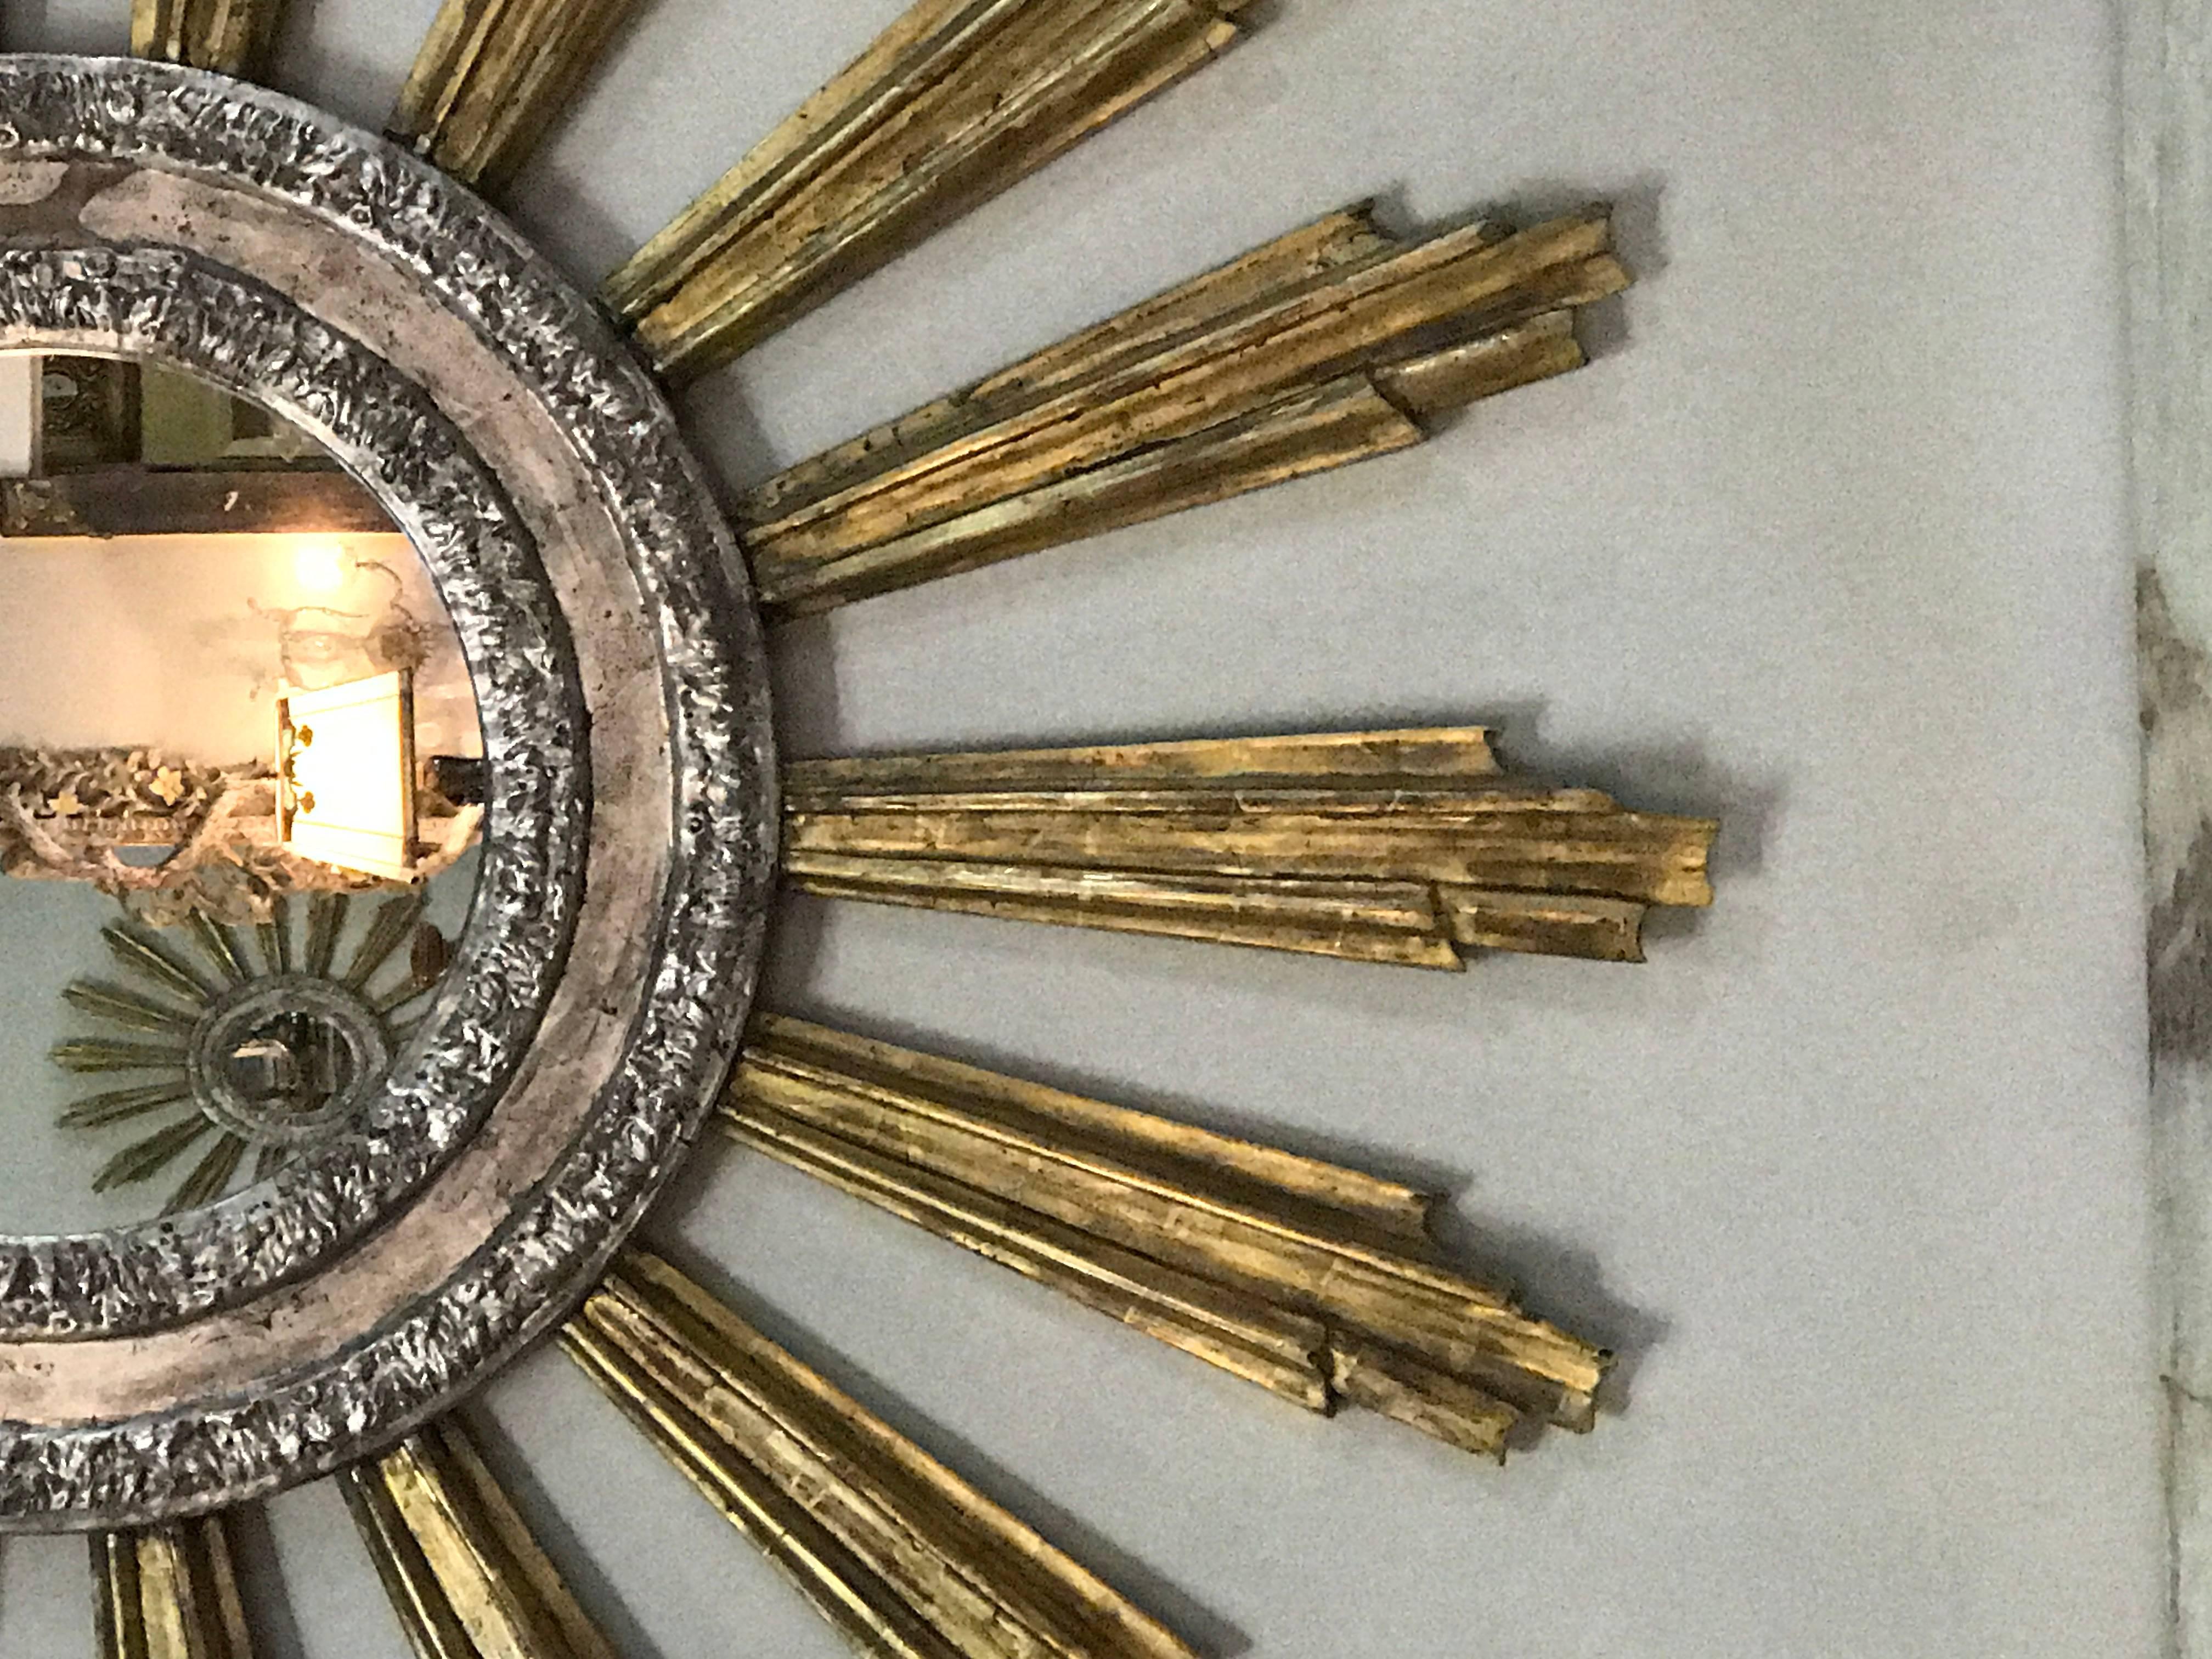 Monumental Italian silver and gold leaf sunburst mirror. A great statement piece for any room!